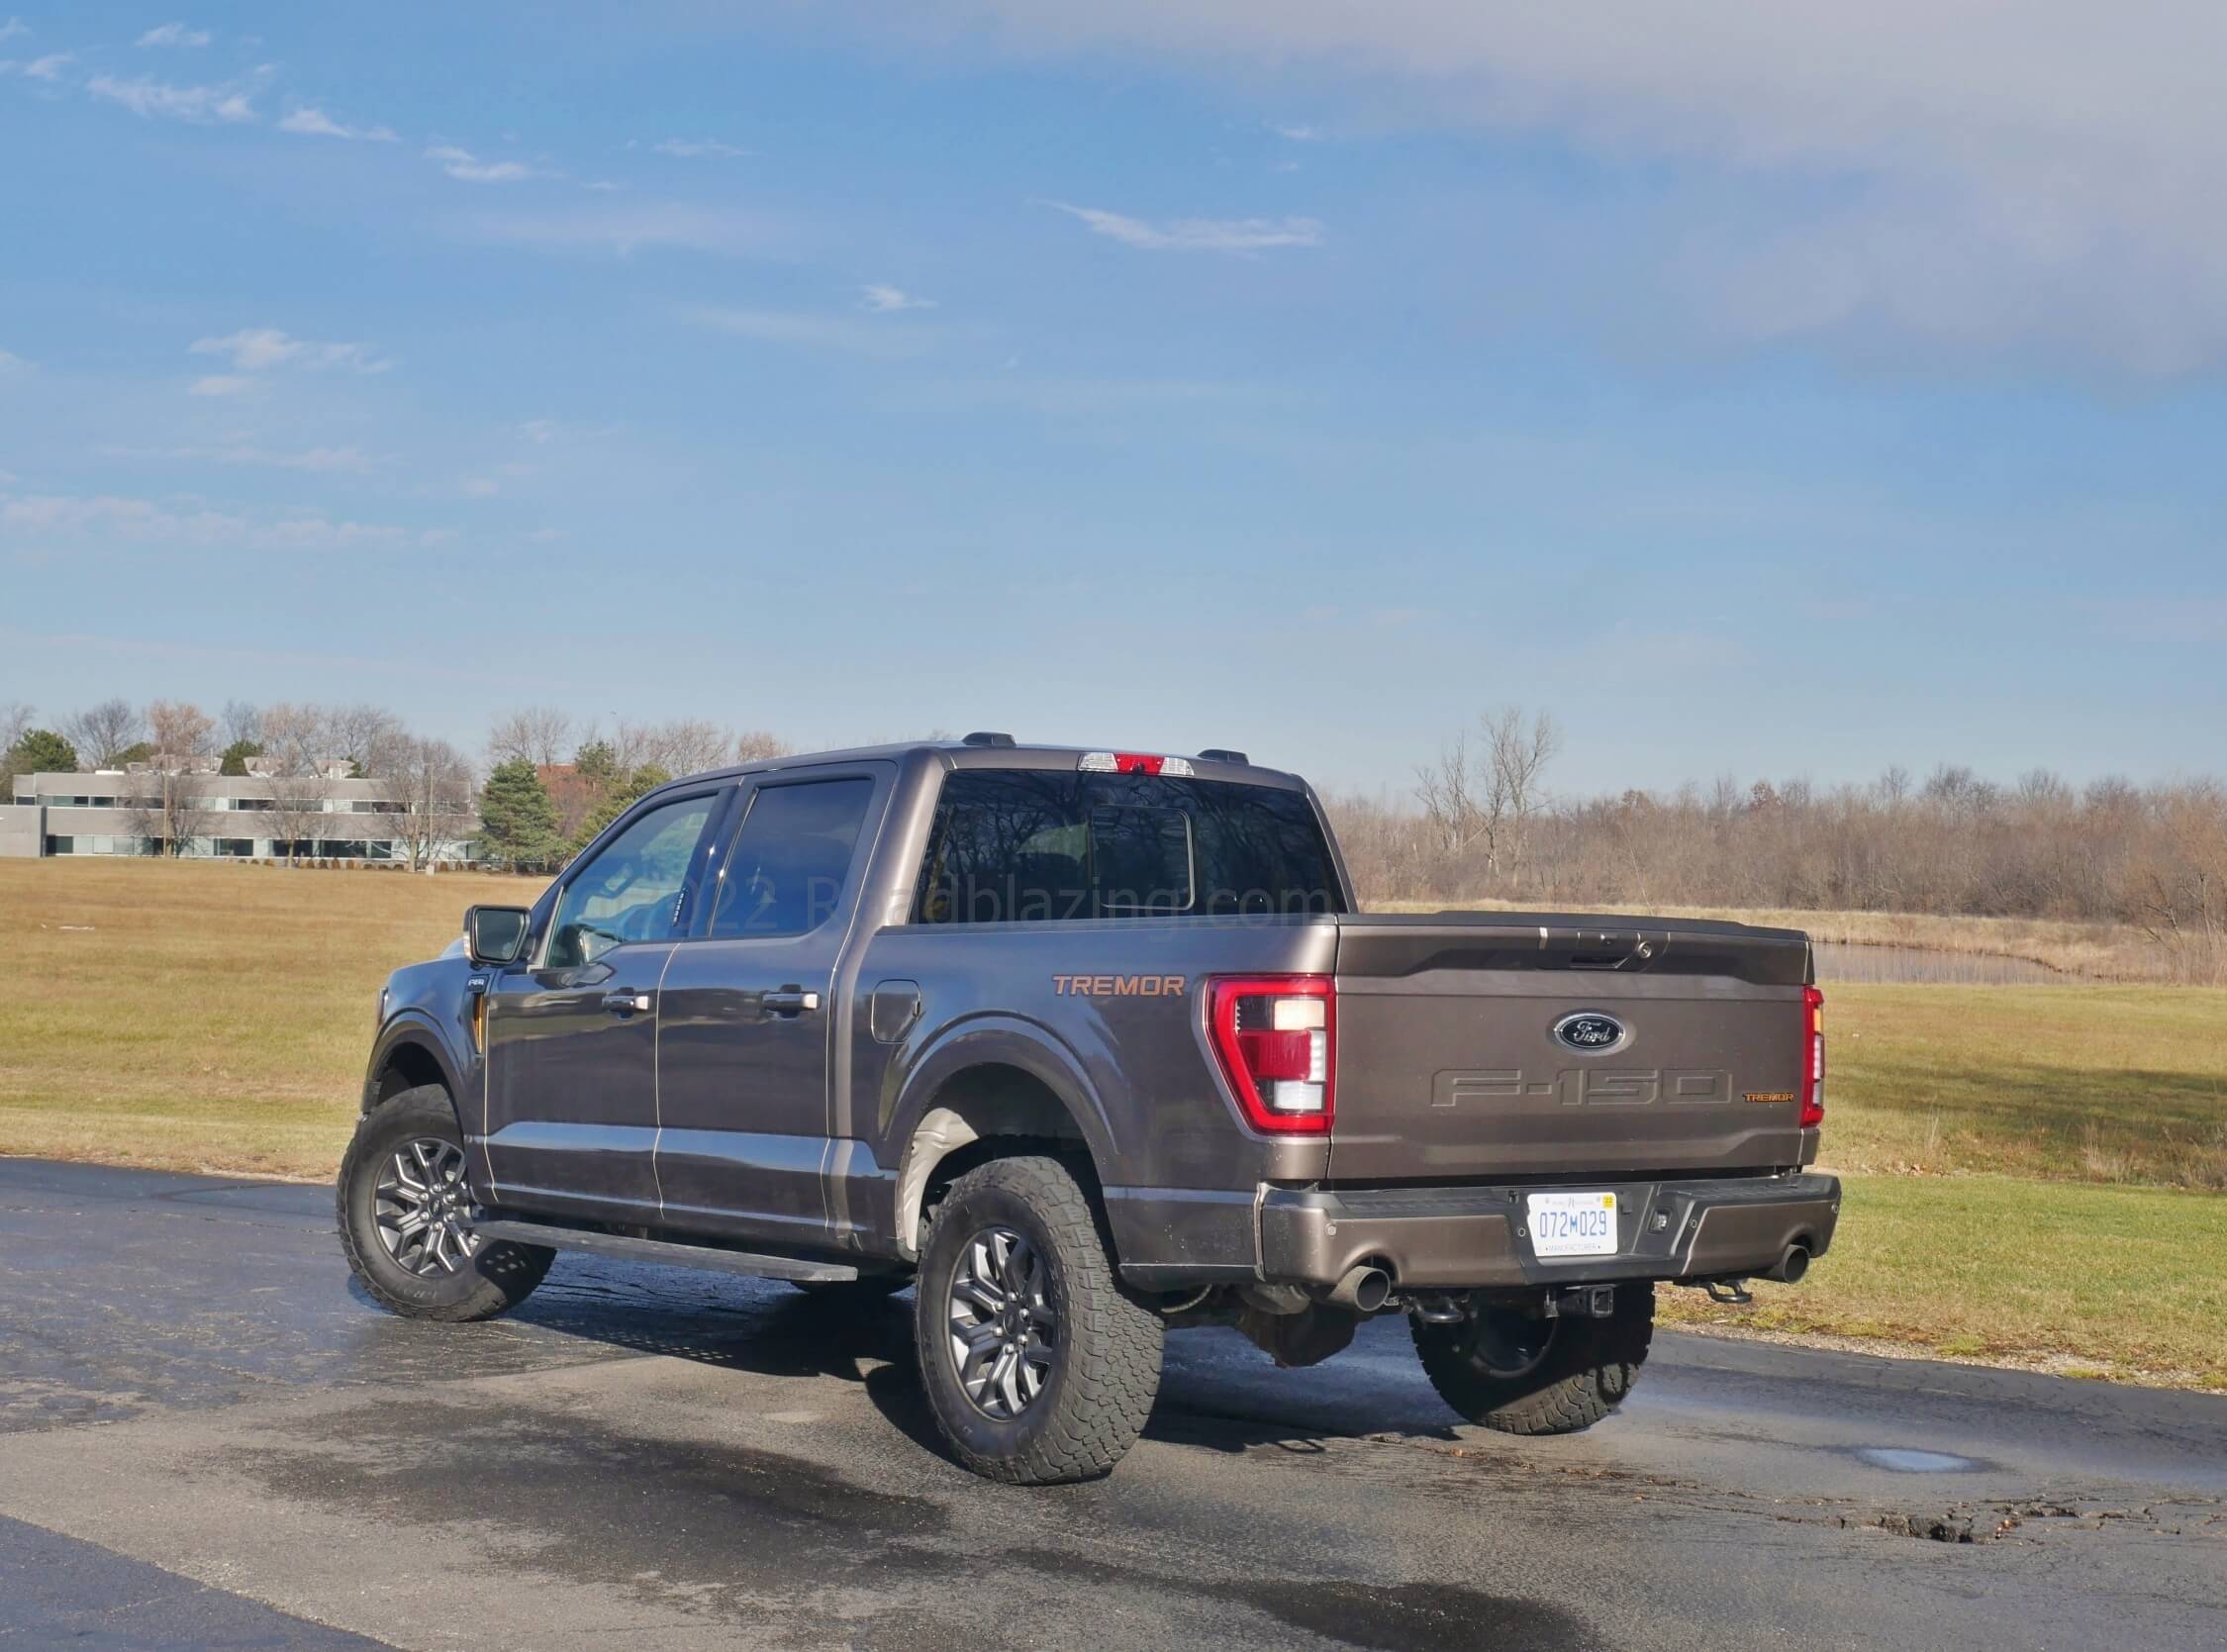 2021 Ford F-150 SuperCrew Tremor 4x4: +2.1" taller cab height, than Lariat FX-4 trim with revised bumper